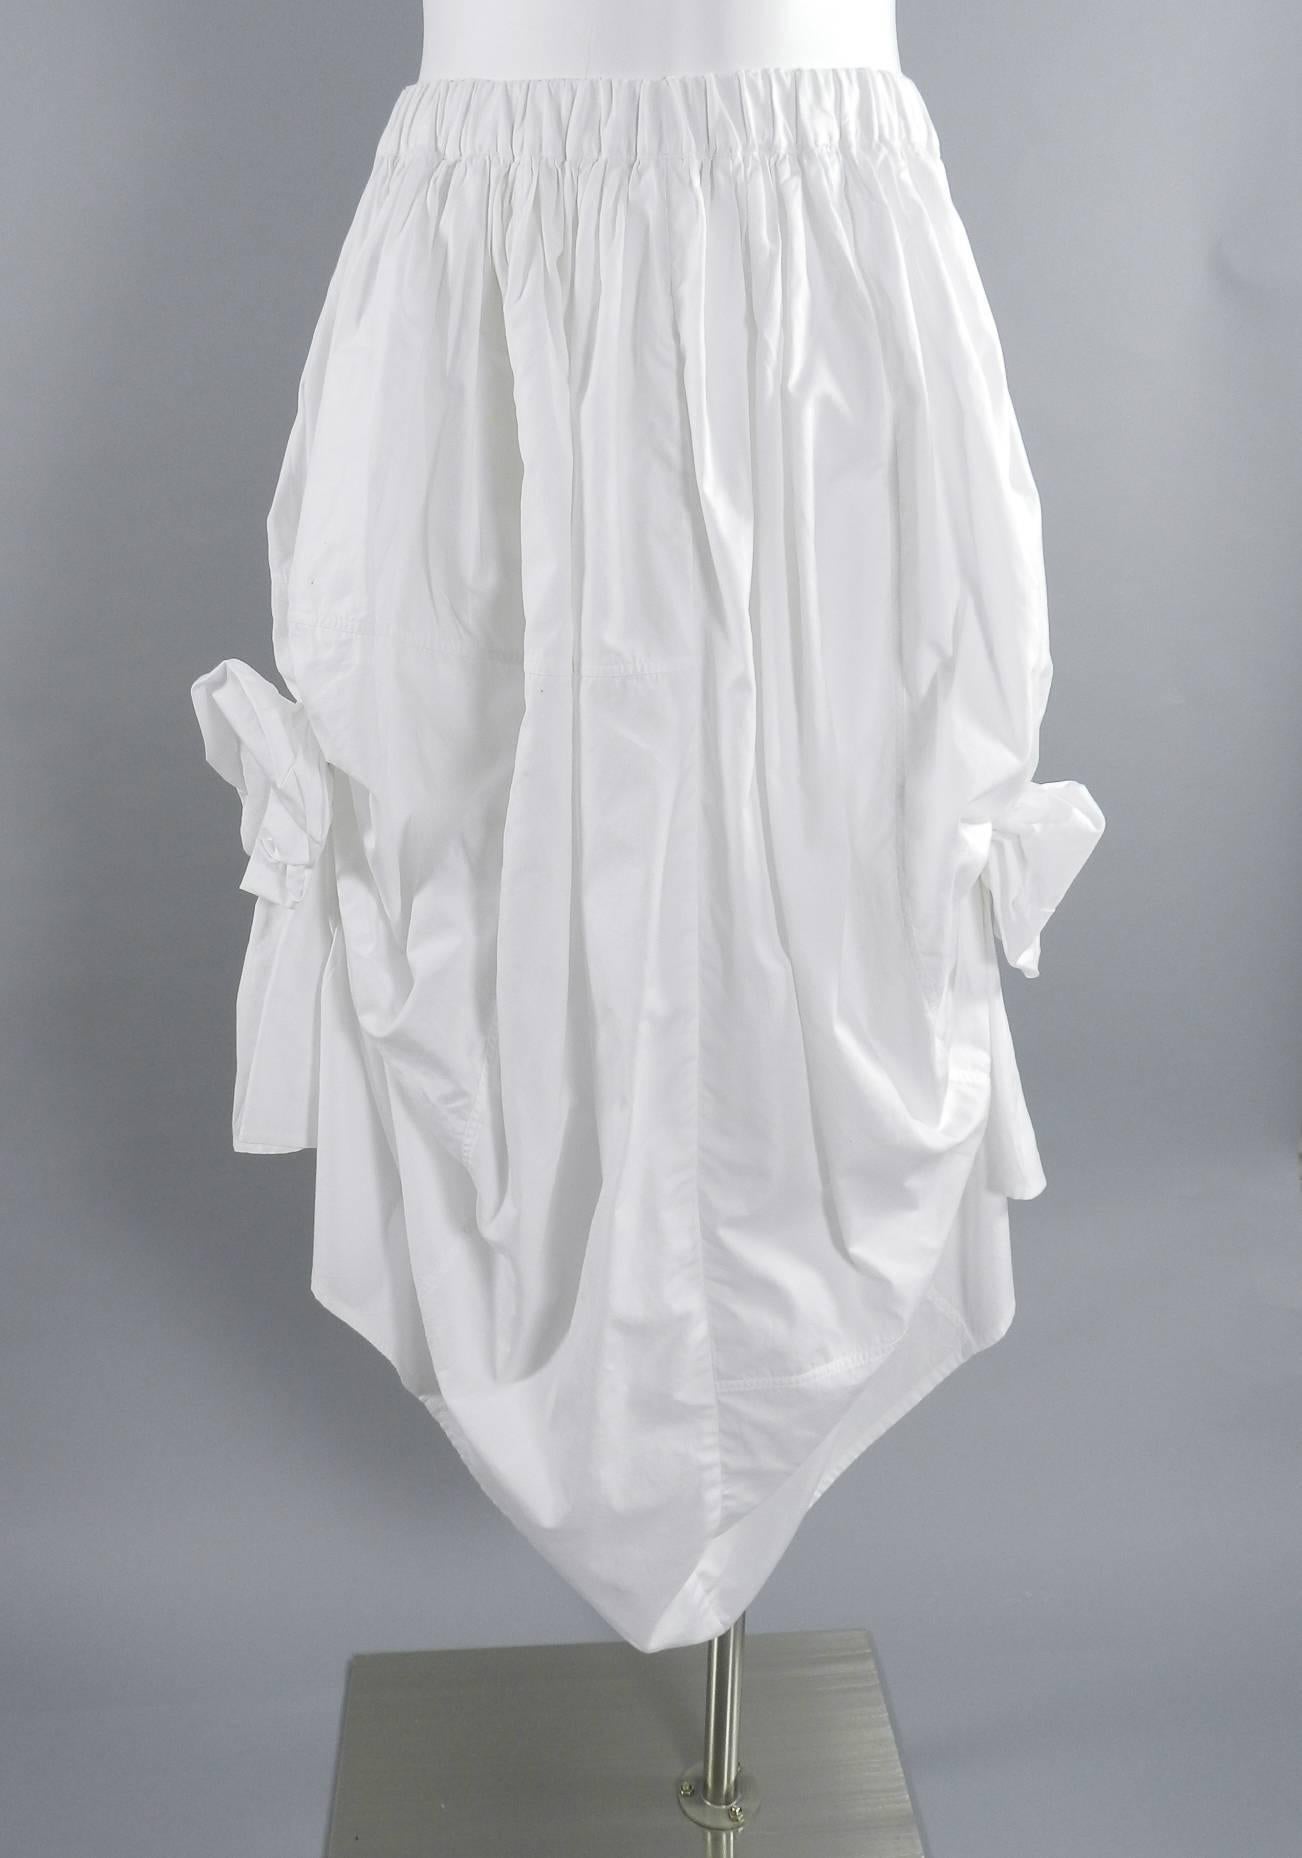 Comme des Garcons White Cotton Skirt with Rosettes 4